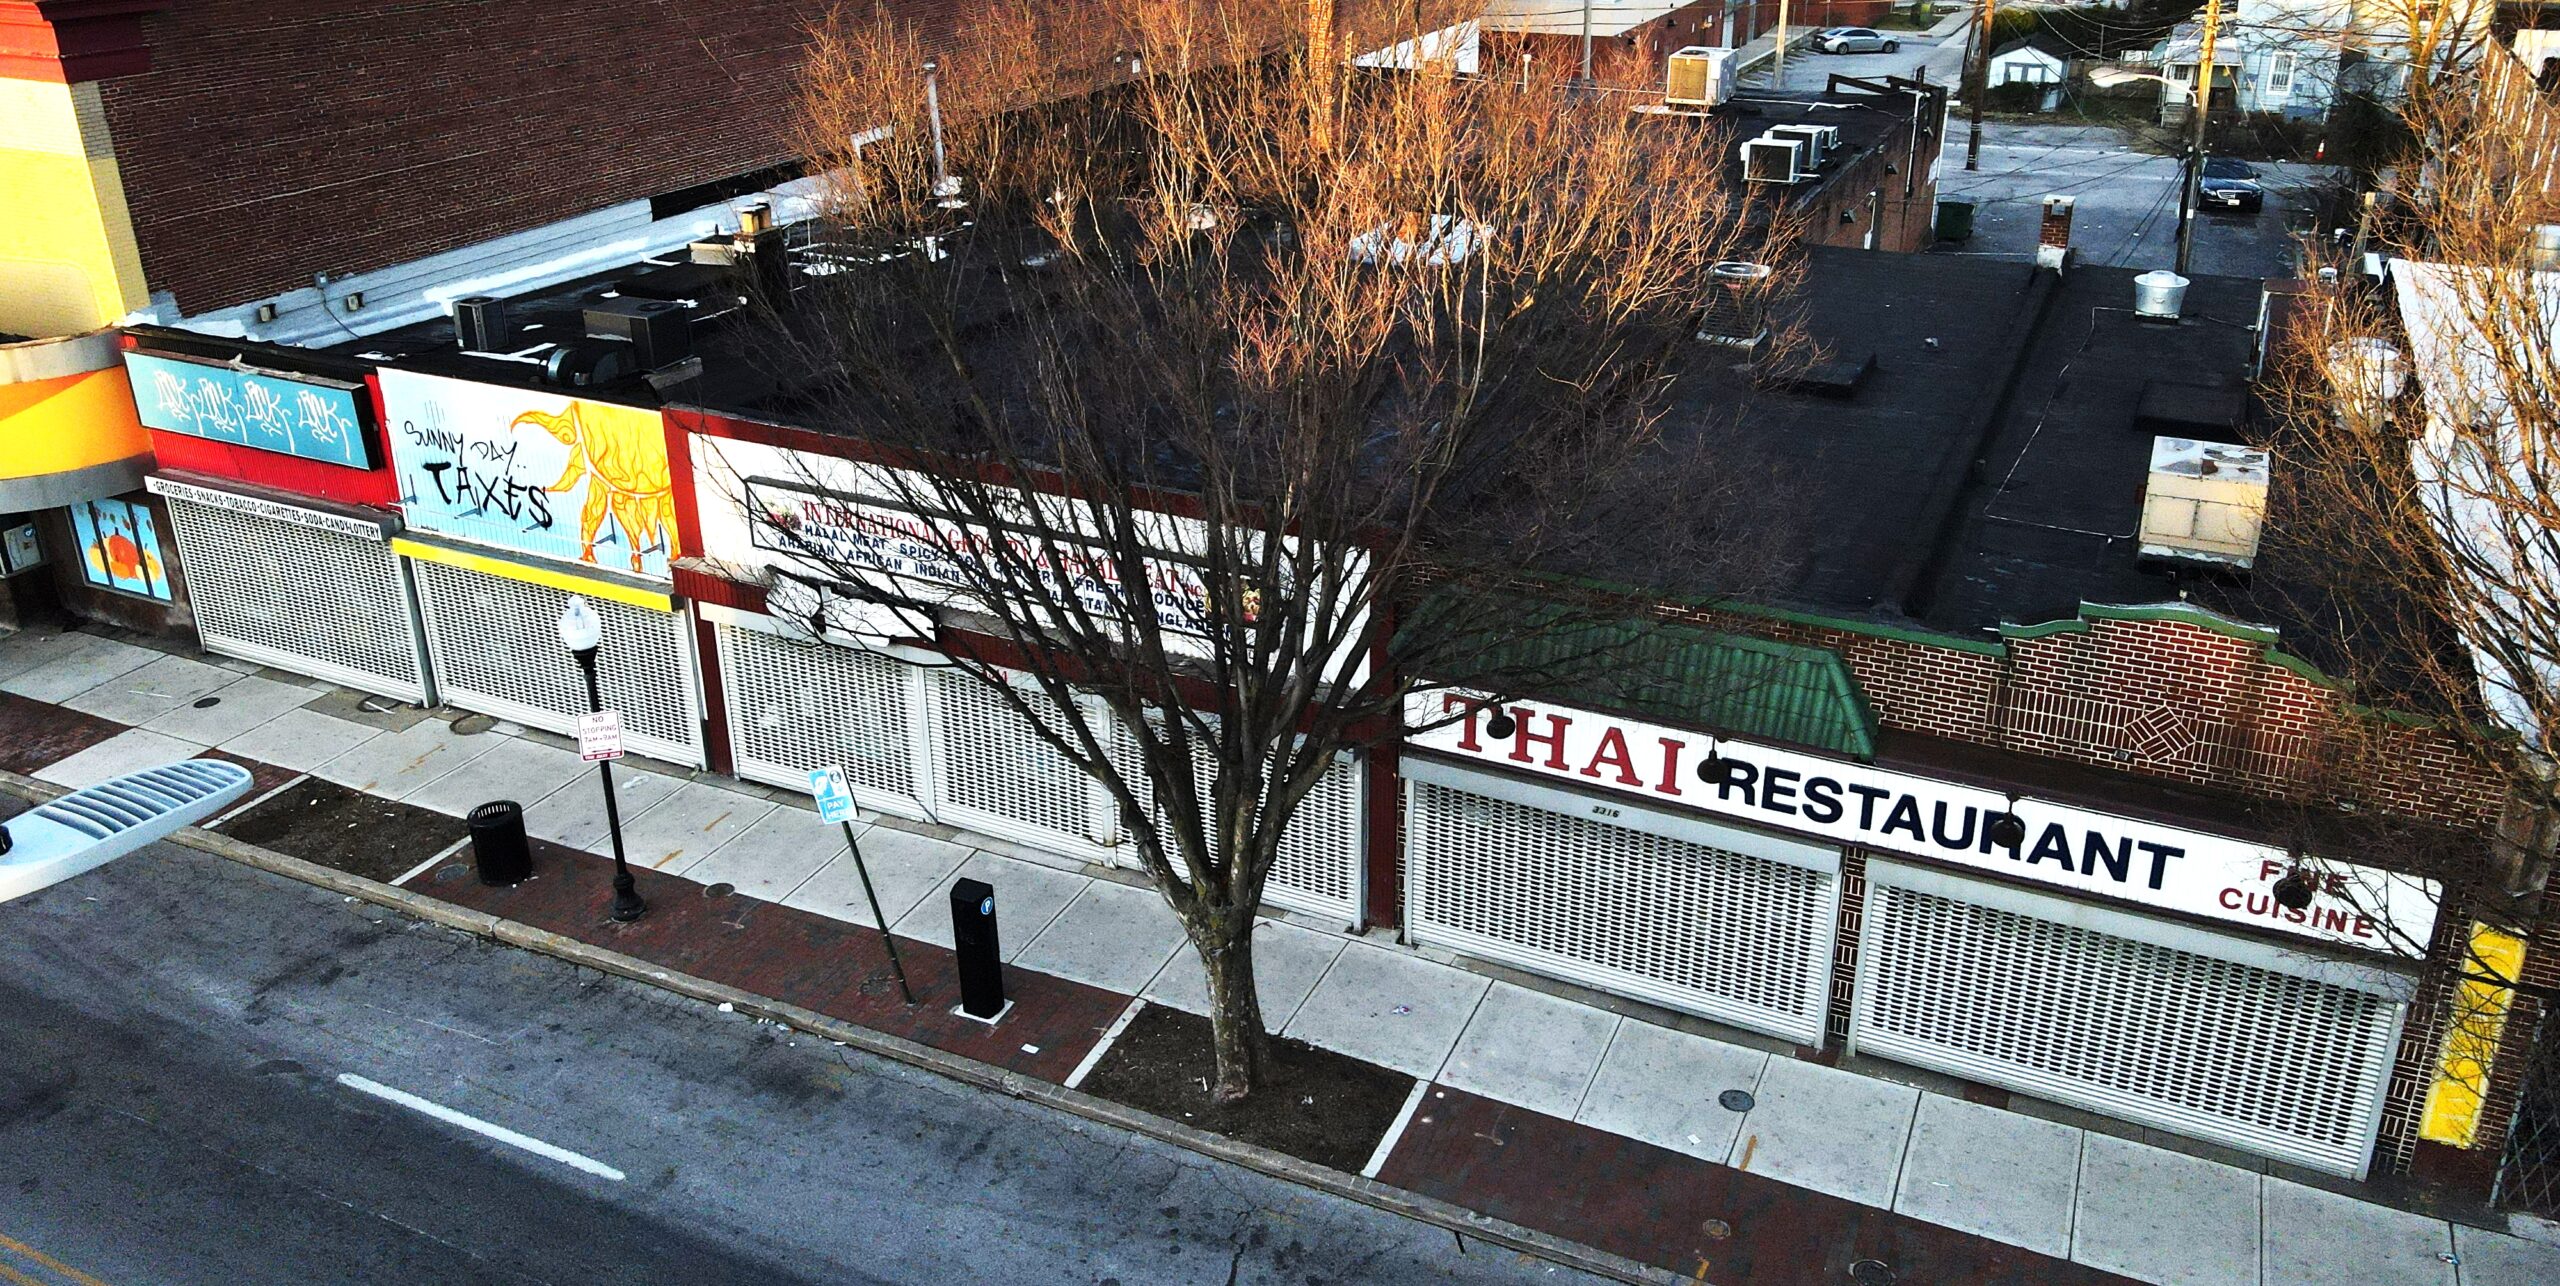 3308 Greenmount Ave: 11,450 Sq. Ft. Retail Shopping Strip / Baltimore Redevelopment Opportunity